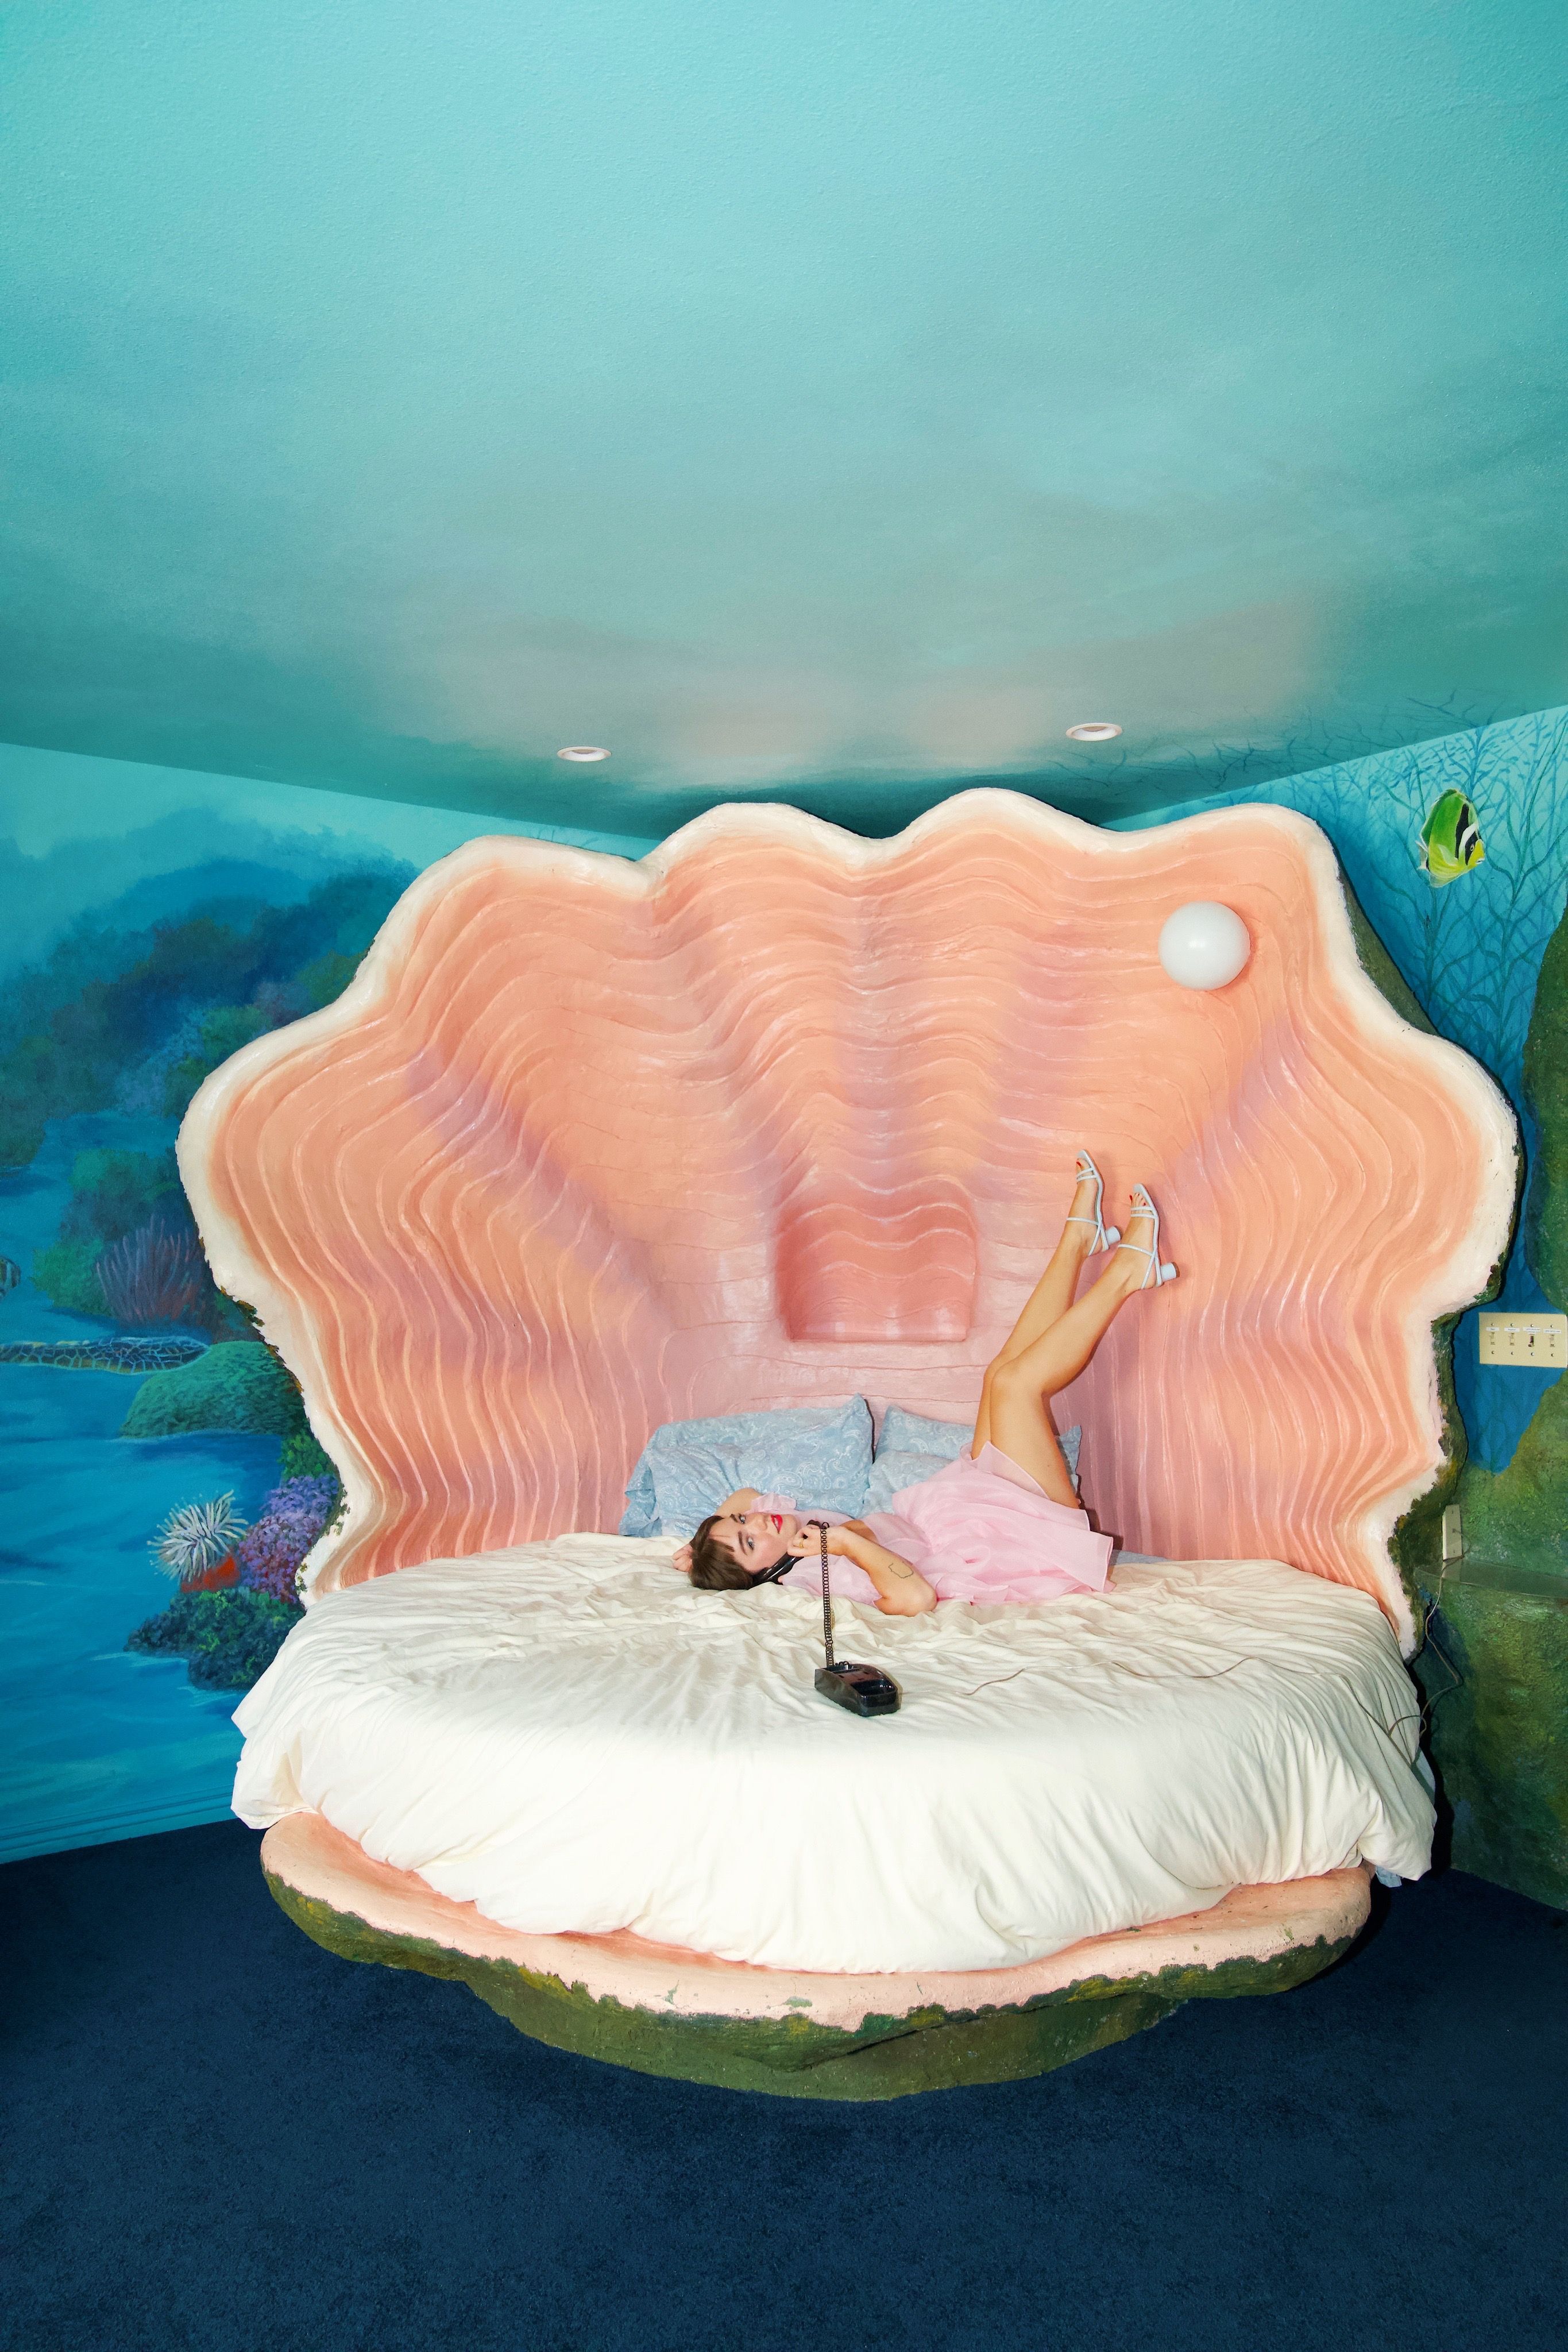 The Couple Making Themed Budget Hotels a Dreamy Instagram Aesthetic picture